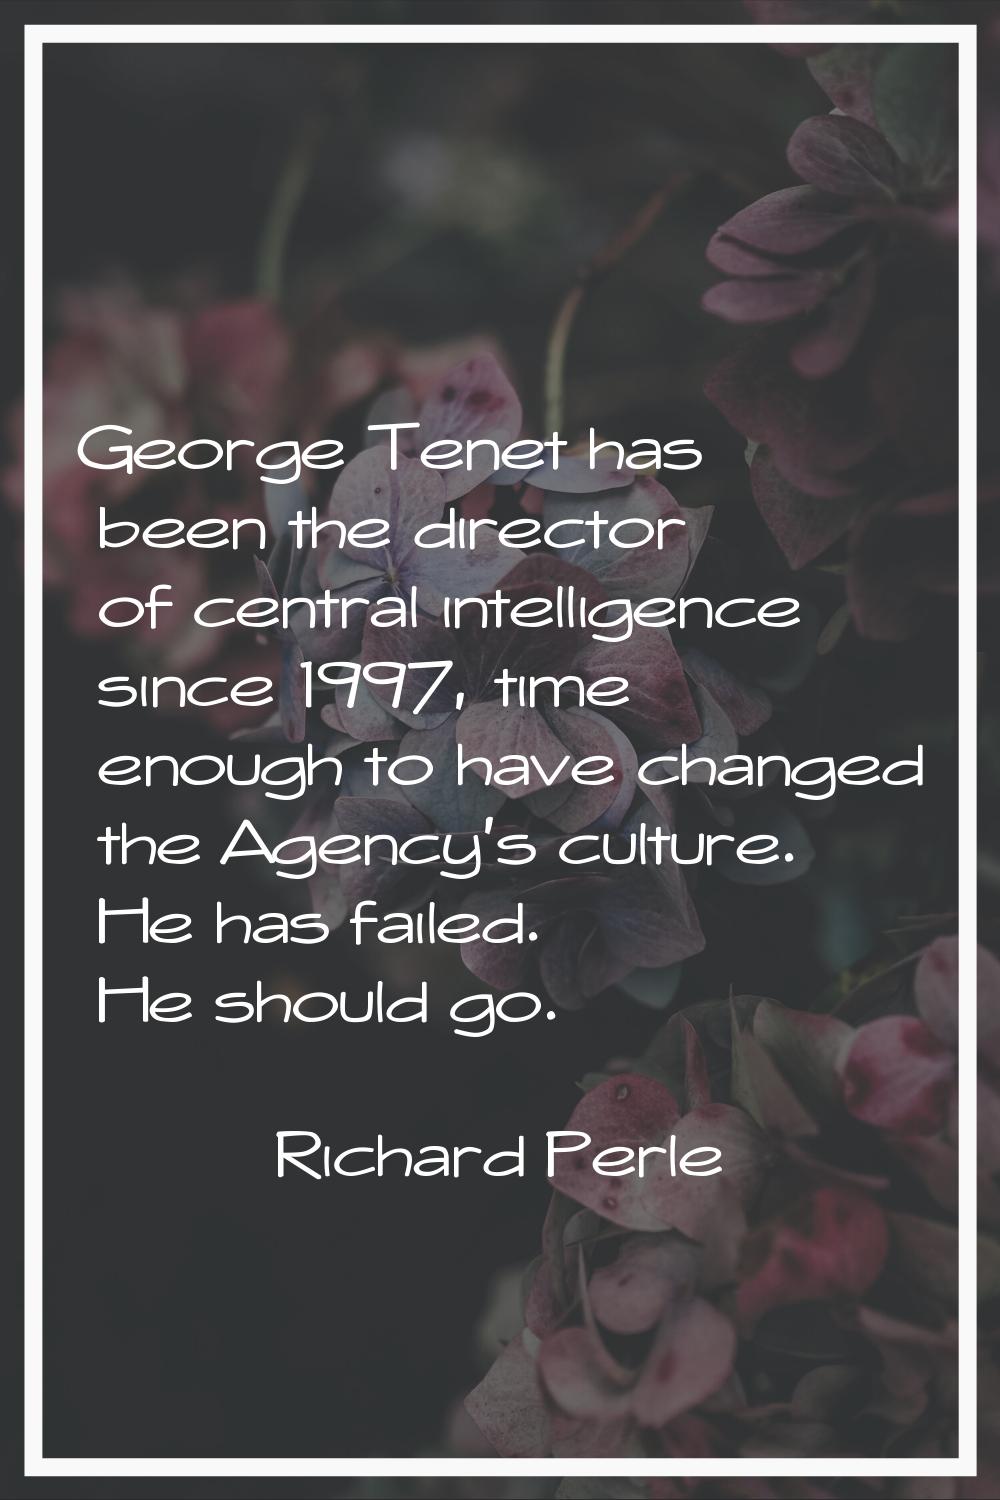 George Tenet has been the director of central intelligence since 1997, time enough to have changed 